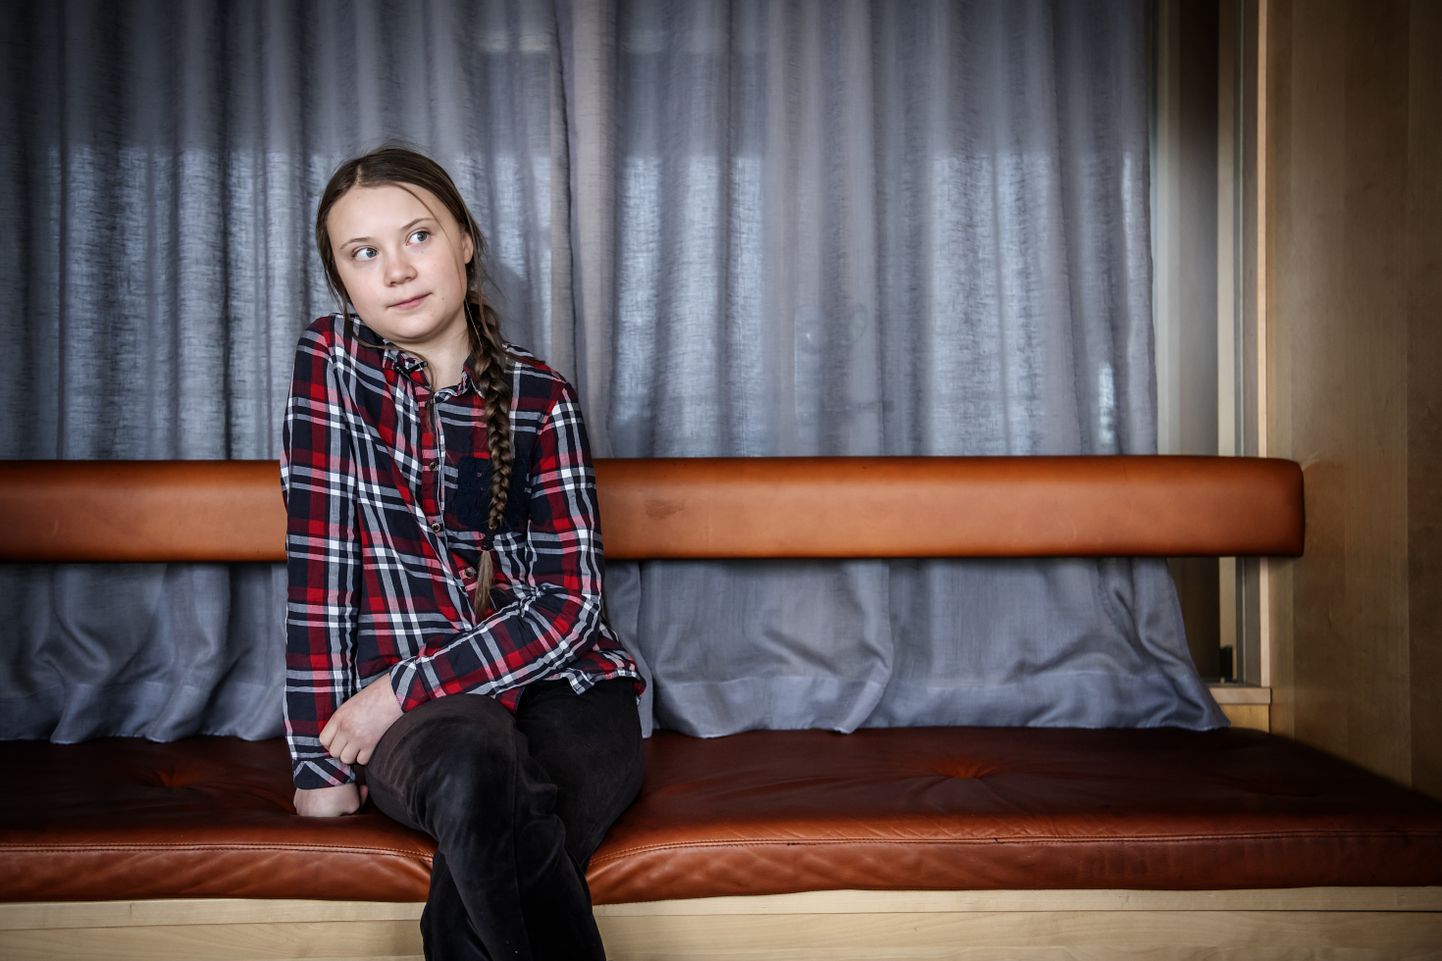 16 year old environmental activist Greta Thunberg has been elected “Woman of the Year in Sweden” March 8, 2019. Greta rose to  fame when starting a schools strike for the climate outside the Parliament building in Stockholm Sweden.
 Foto: Anna-Karin Nilsson/ EXP / TT / kod 7141
** OUT Aftonbladet, Barometern **